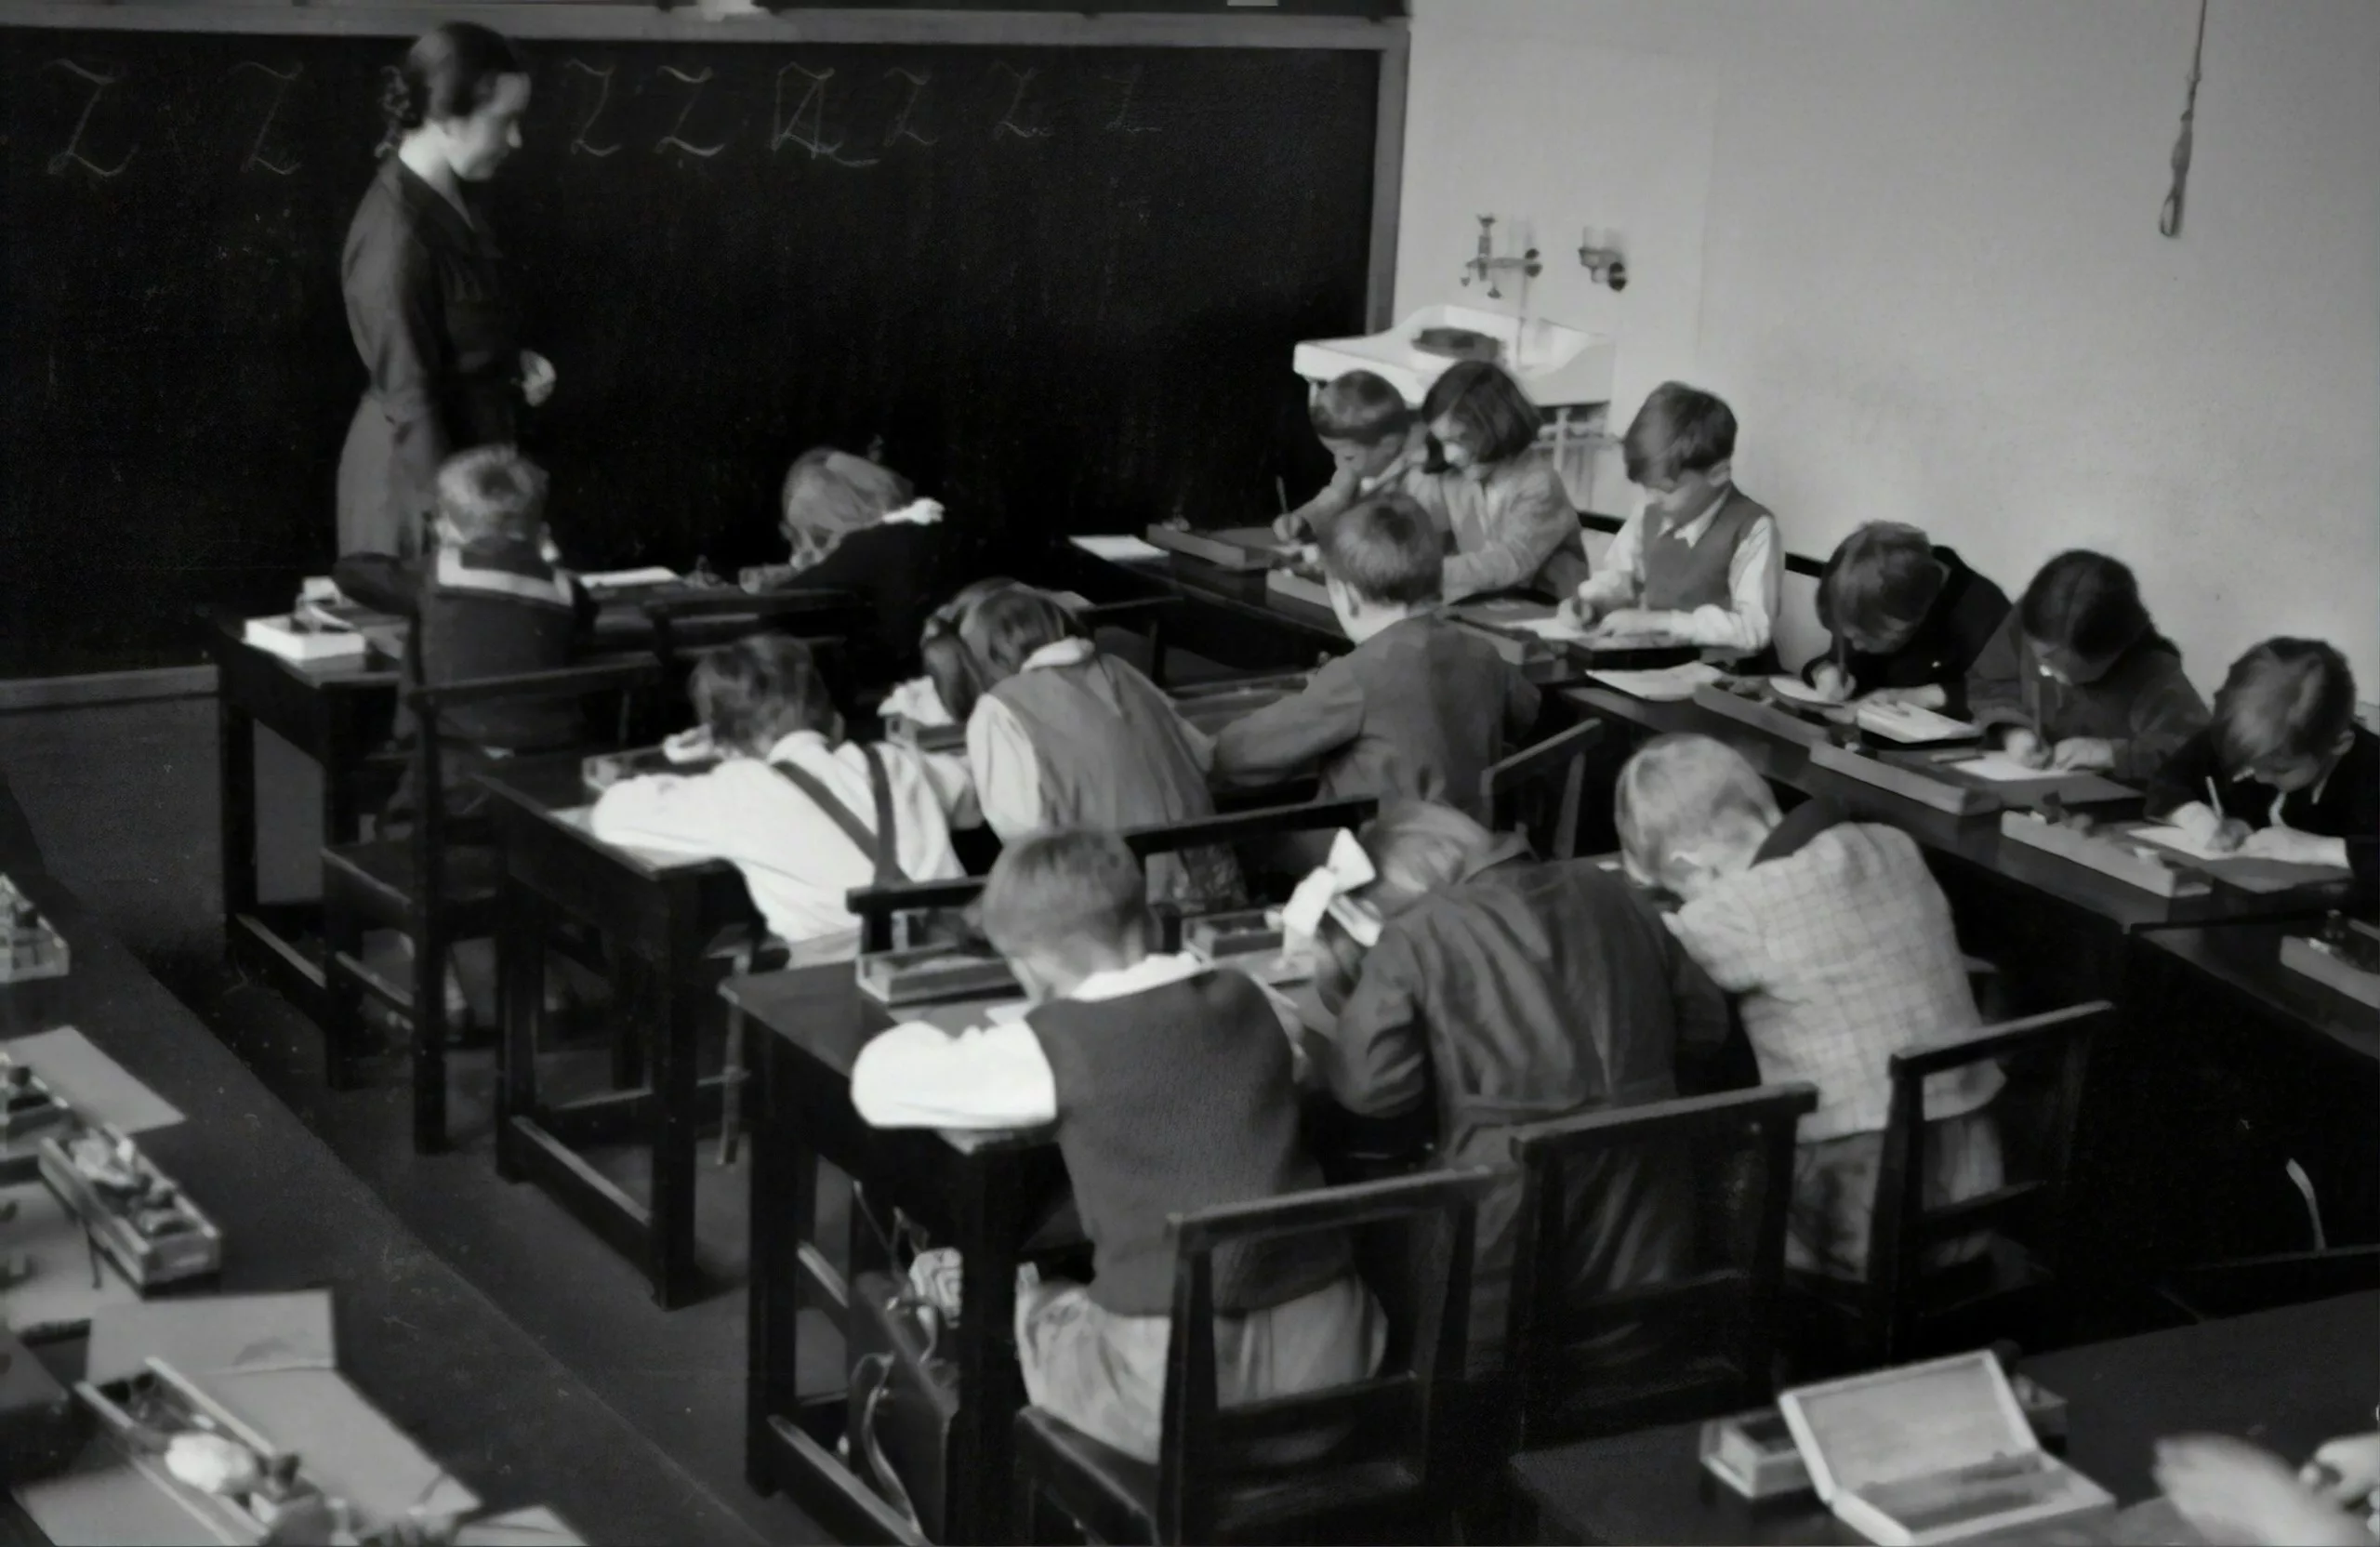 A black and white photo of a teacher giving a handwriting lesson to students